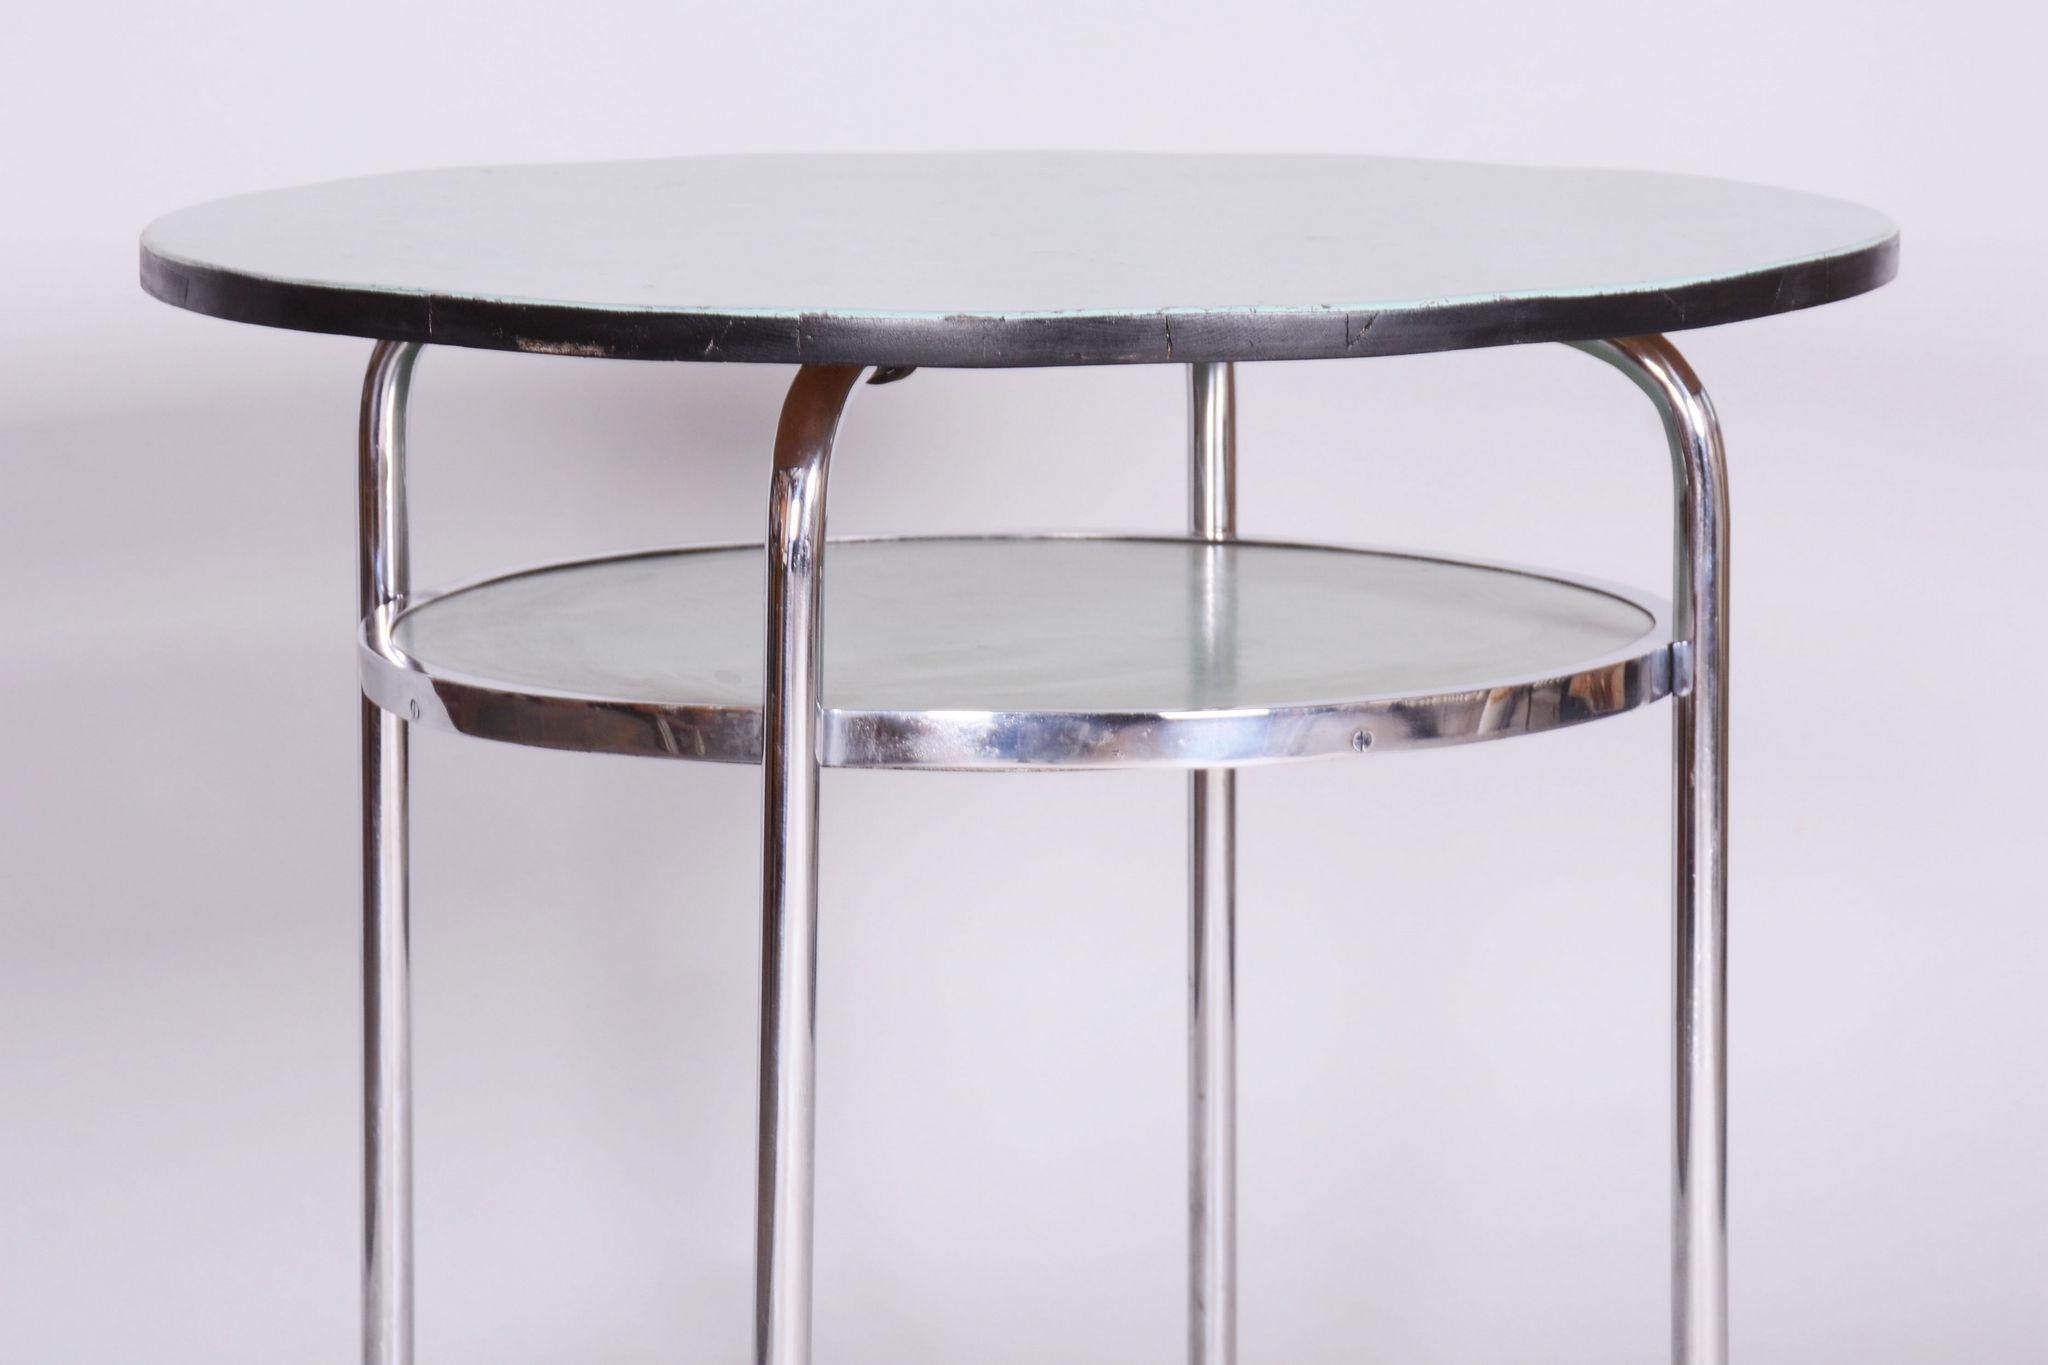 Restored Bauhaus Small Round Table, Chrome, Revived Polish, Czechia, 1930s For Sale 3